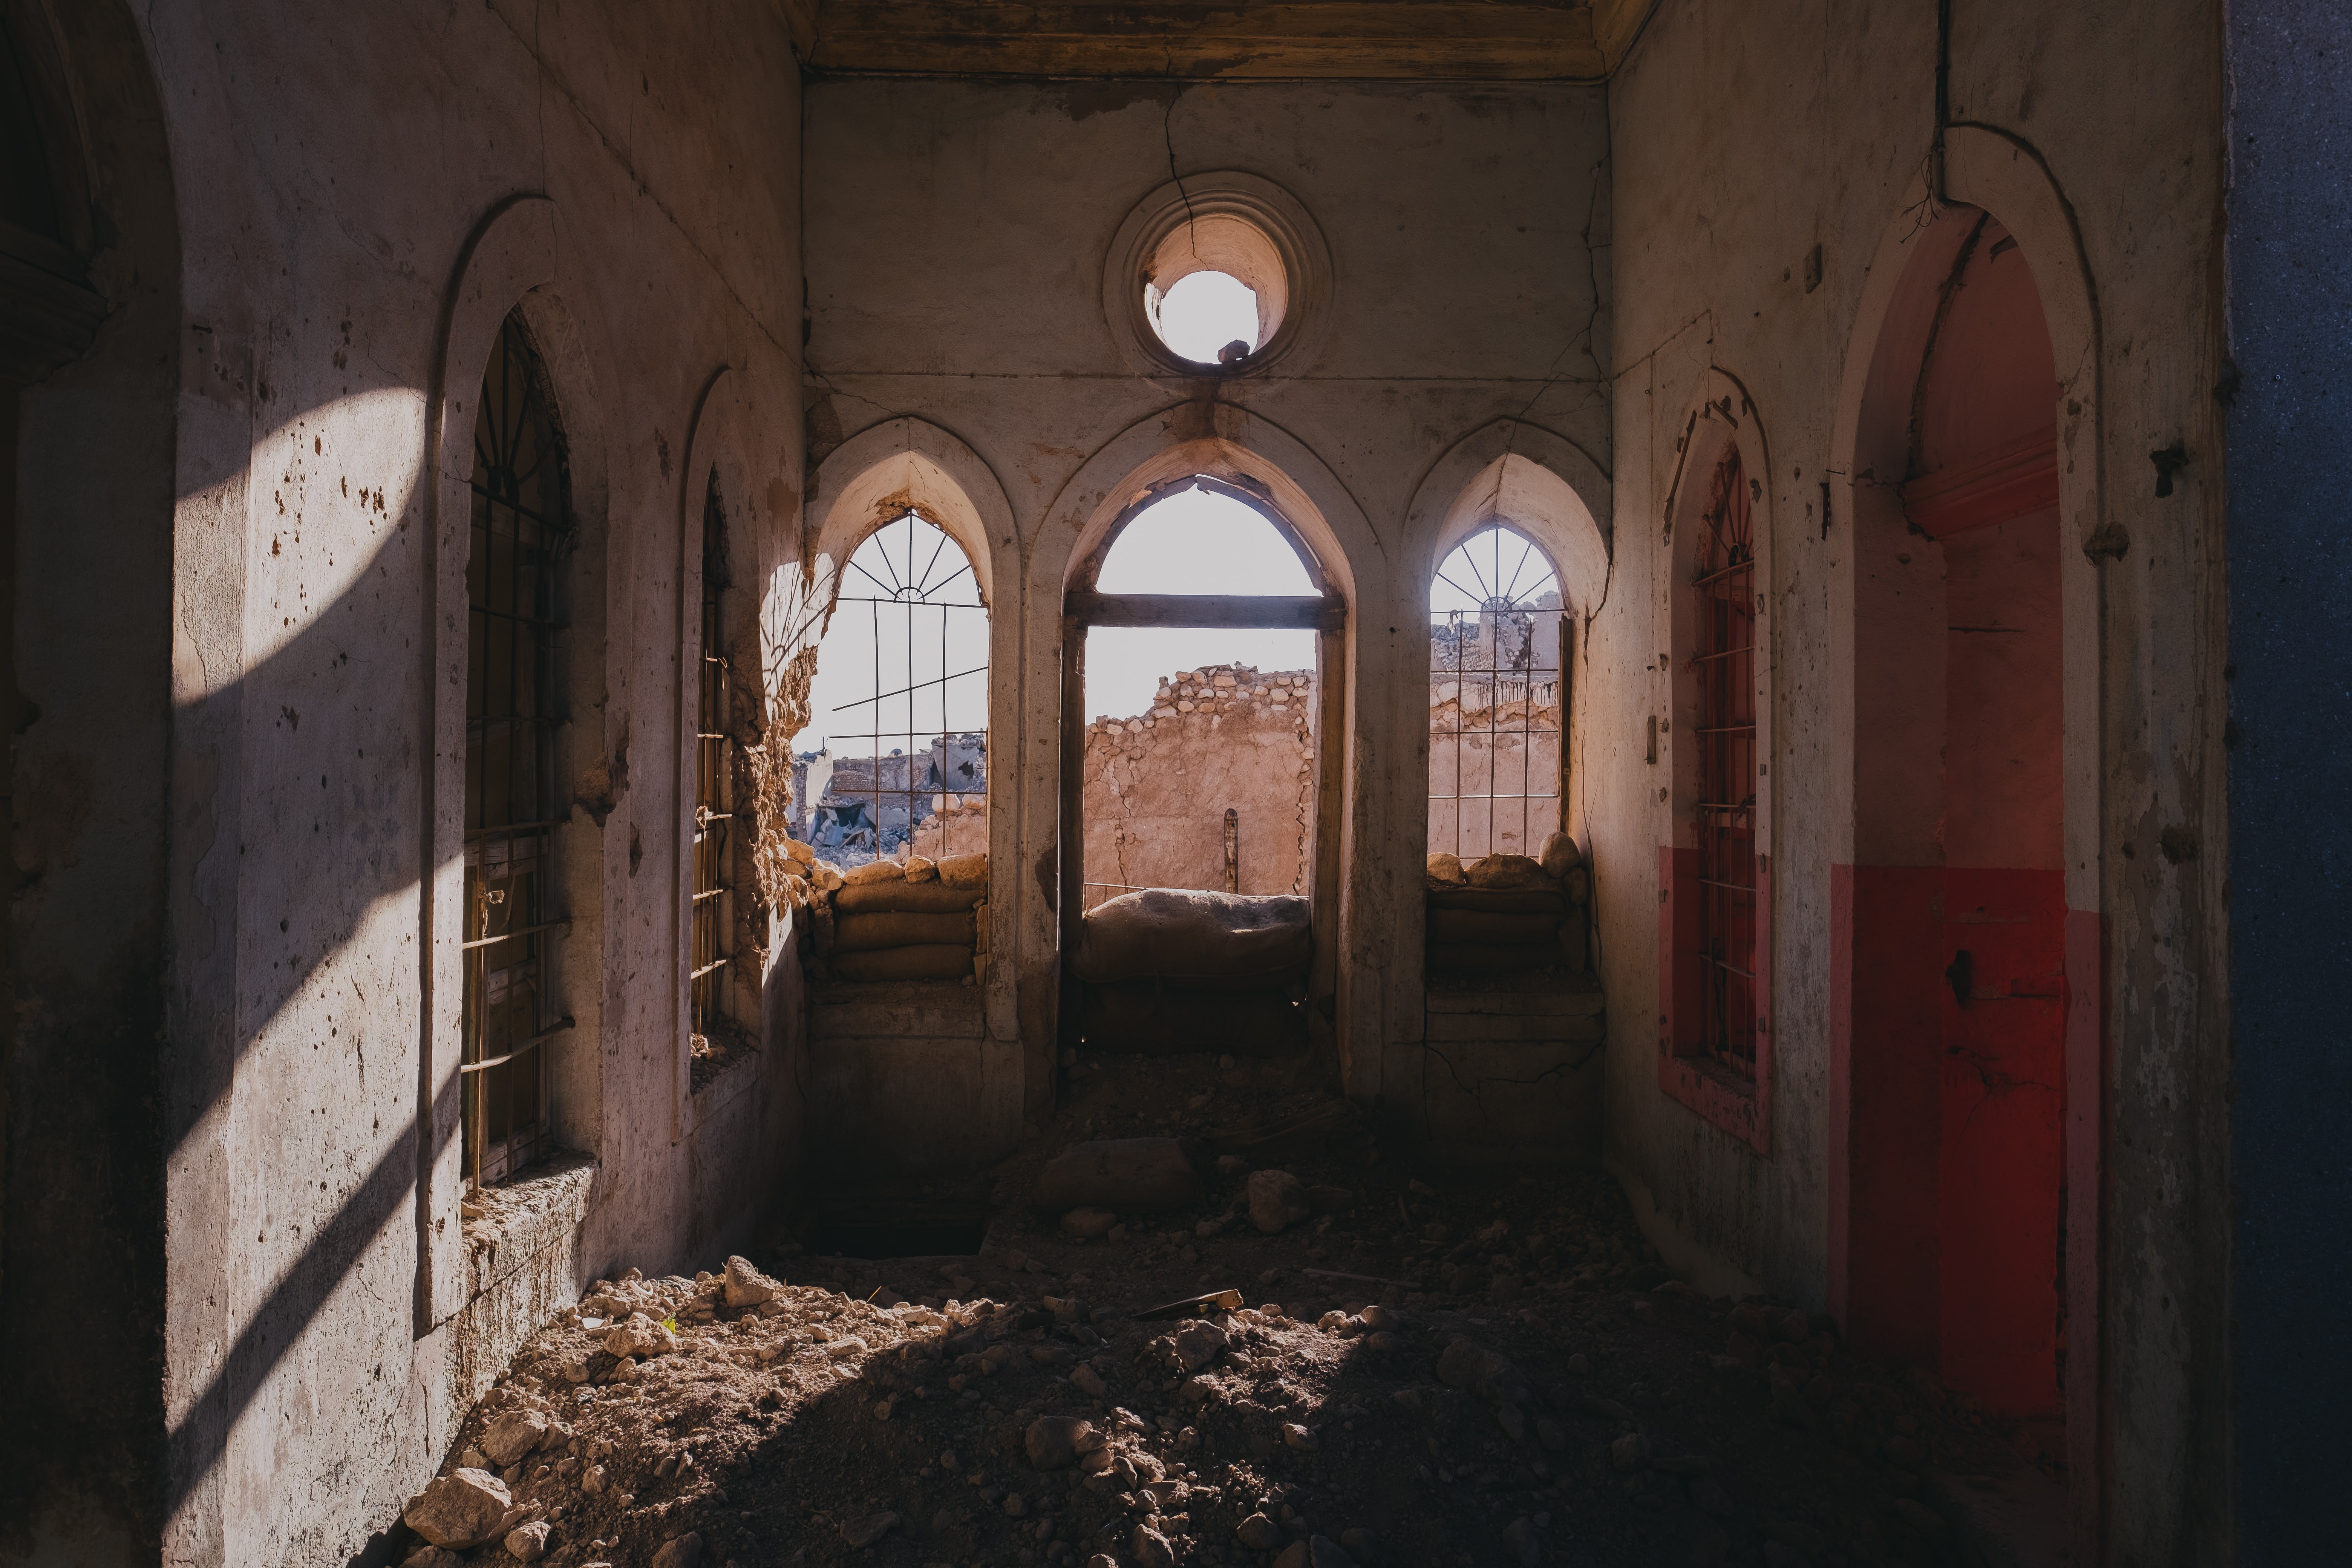 A ruined base for the Islamic State, in Shingal (Sinjar), Iraq. Photo by Levi Meir Clancy on Unsplash